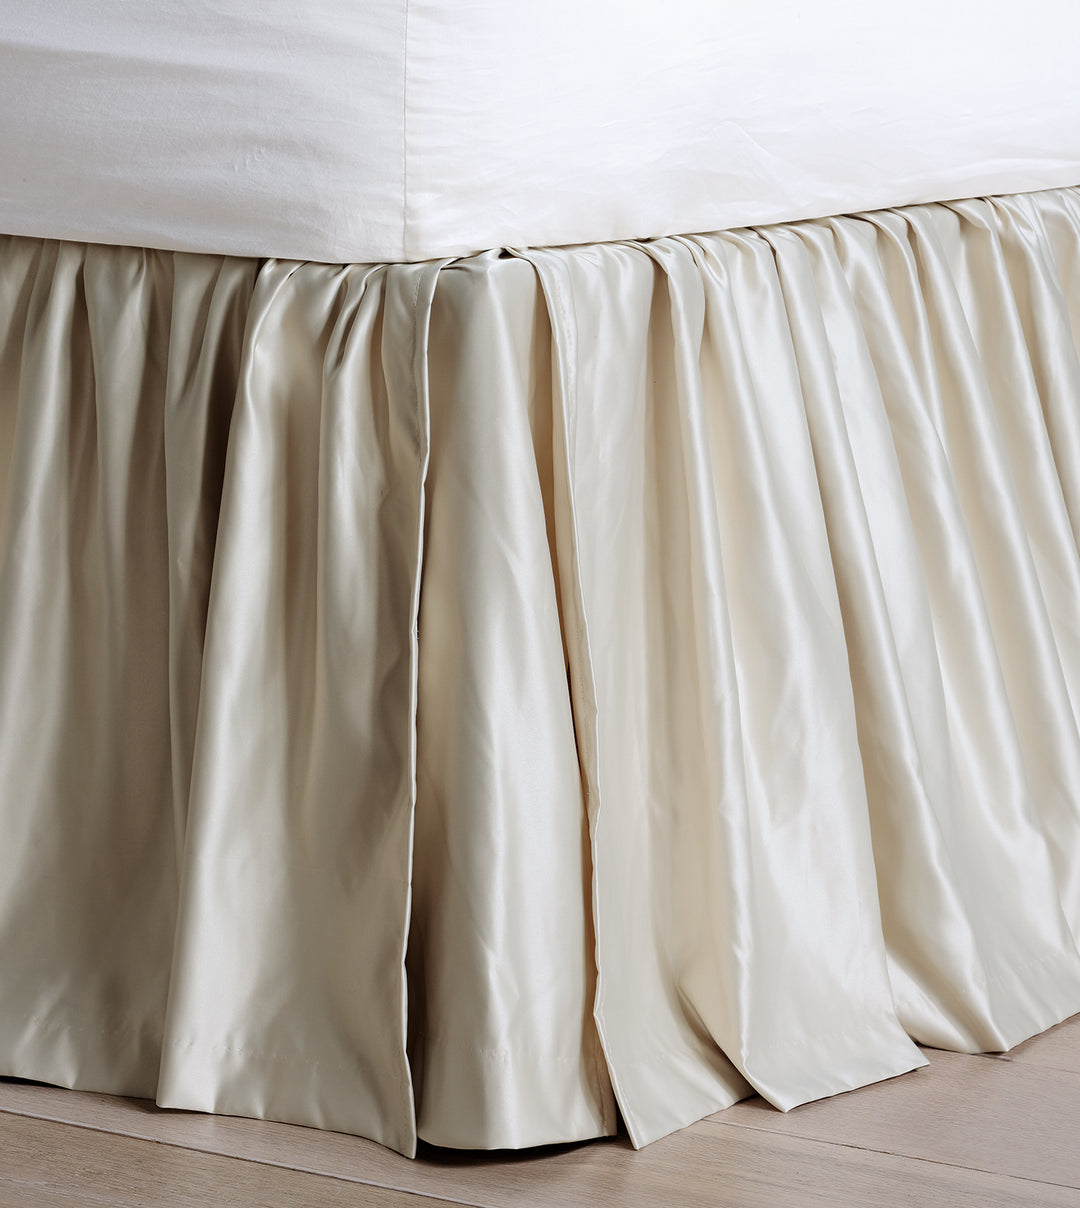 Eastern Accents Jolene Ruffled Bed Skirt Bedskirt By Eastern Accents